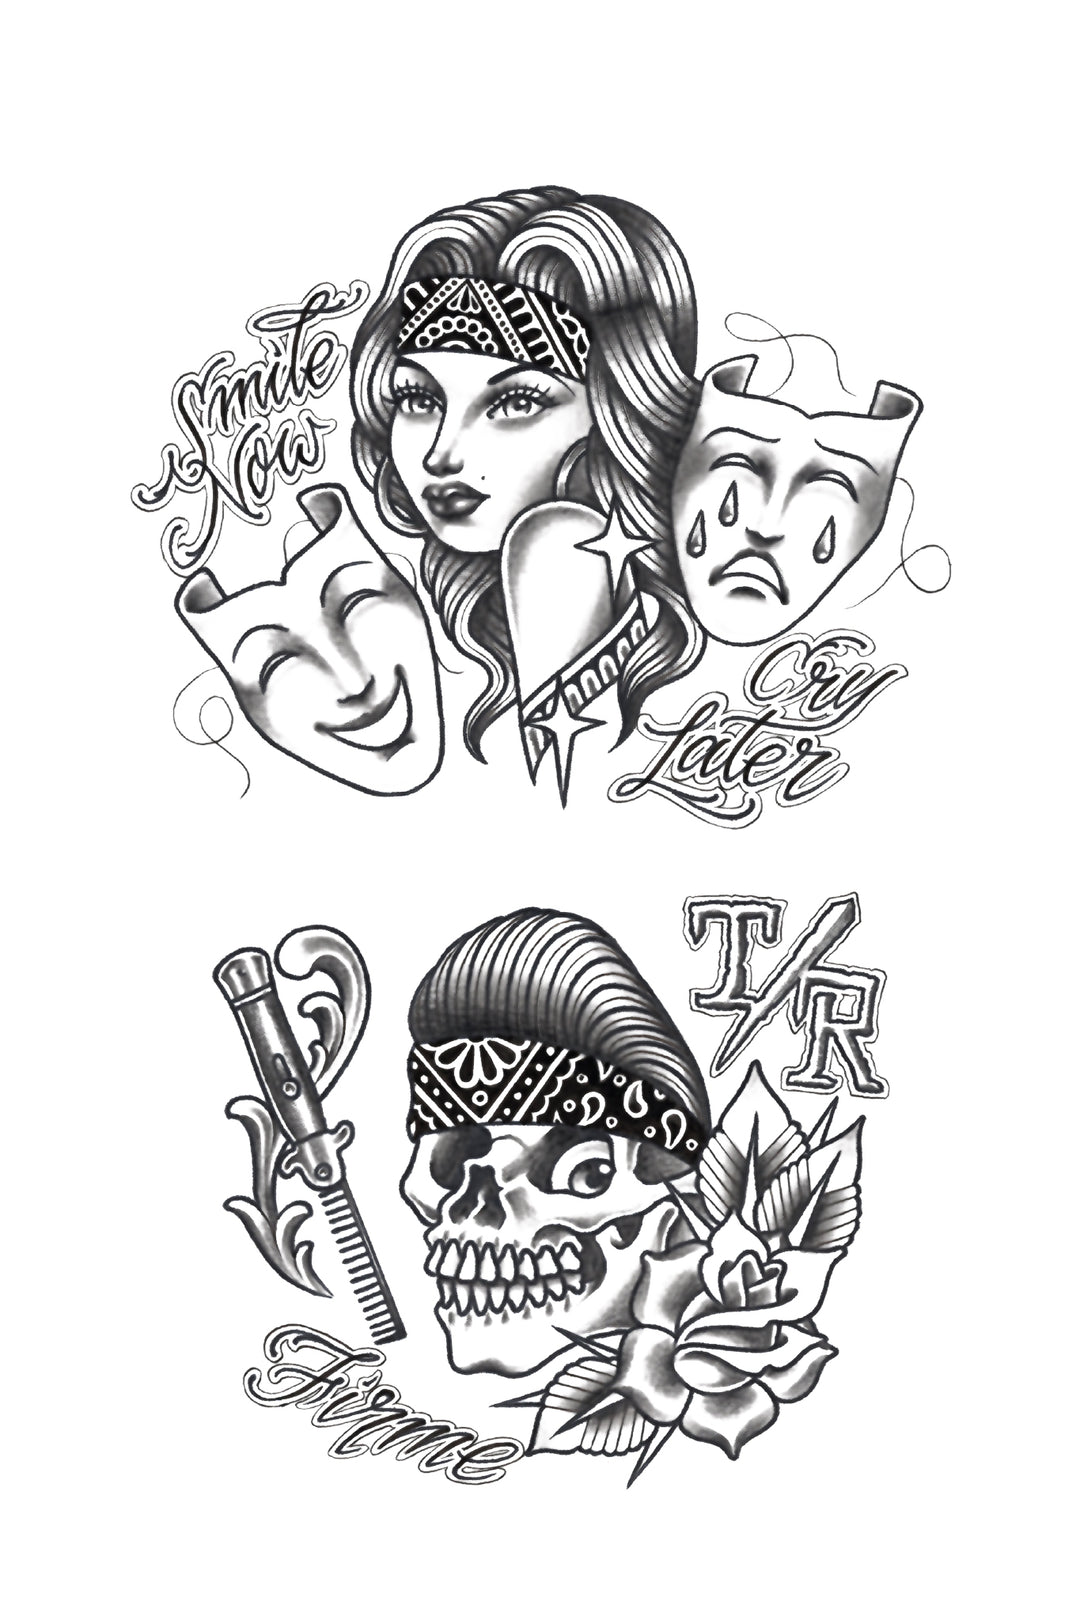 Full design of Mexican-American Chicano temporary tattoo sleeve for kids by Tony Ray Tattoos.